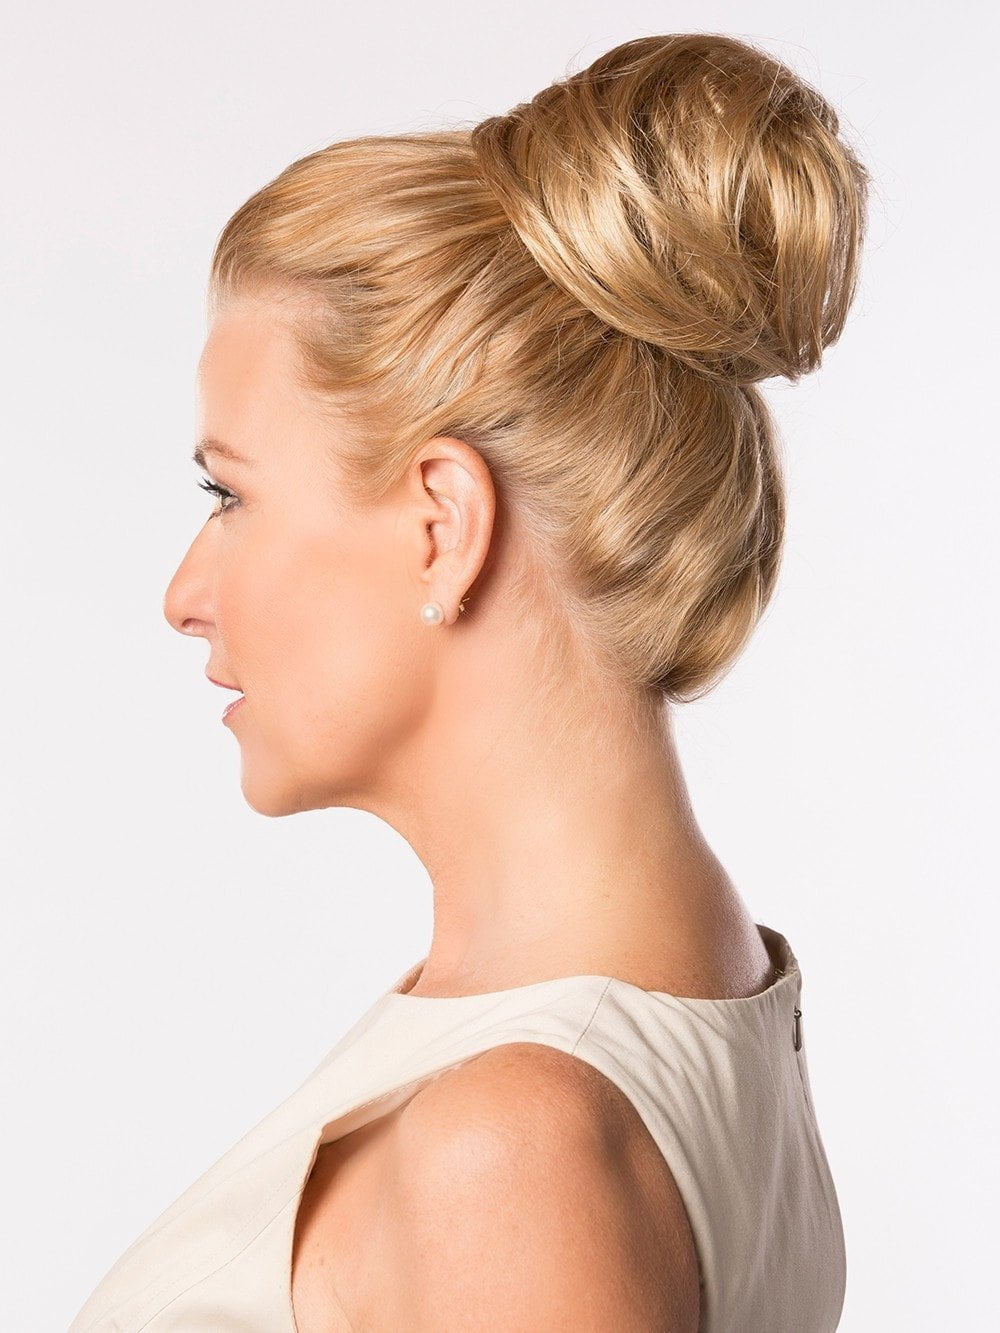 The Honey-Do Hair Bun - Style it Straight or Messy!